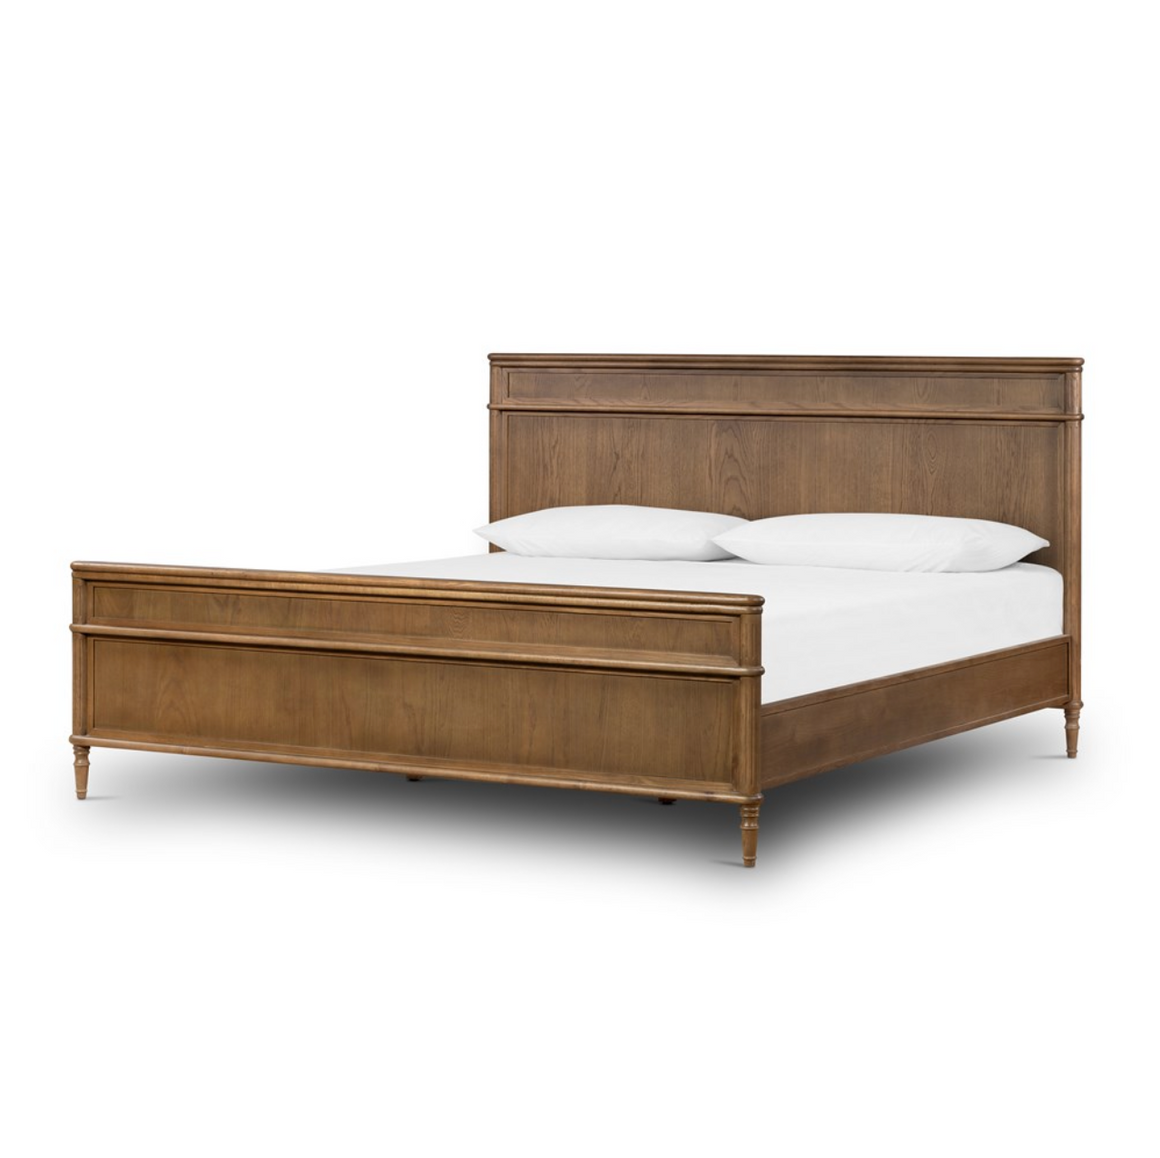 Eloise Queen Bed - Toasted Oak